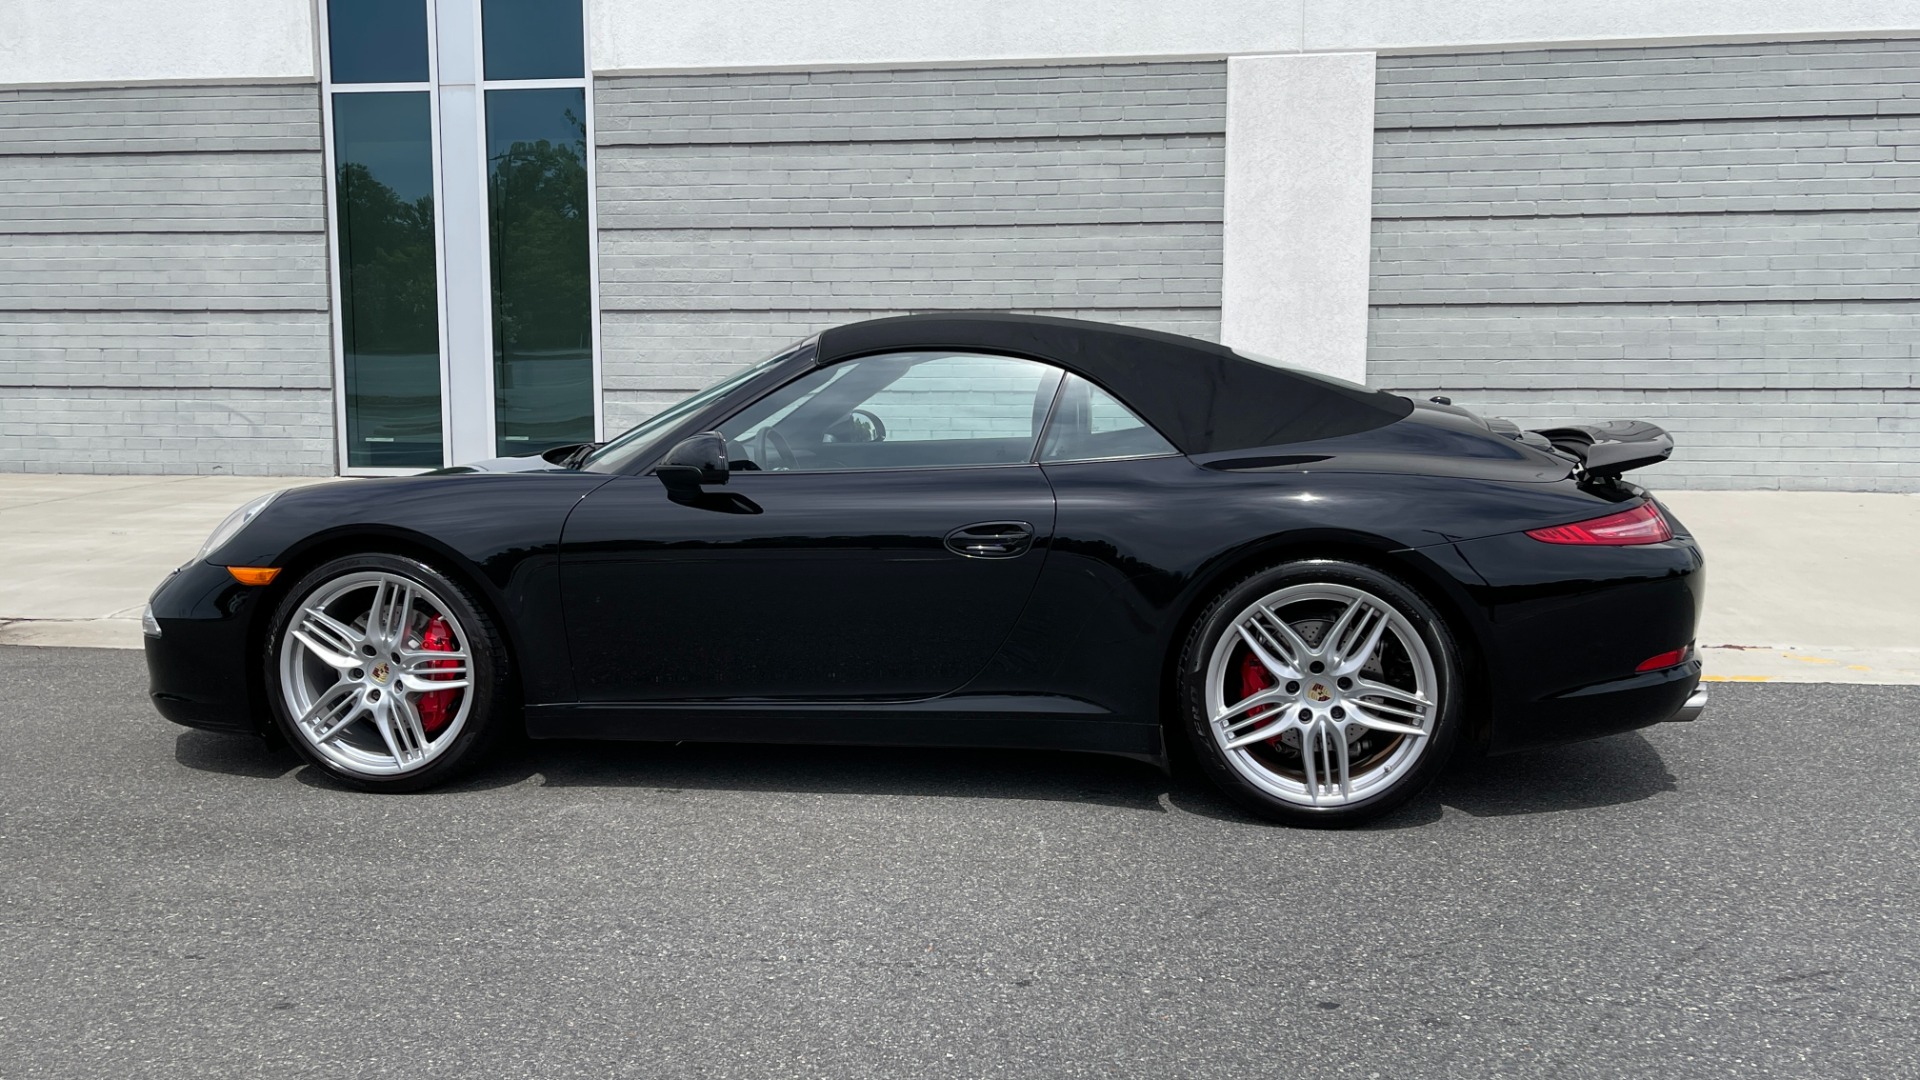 Used 2012 Porsche 911 991 Carrera S / CABRIOLET / PDK TRANSMISSION / SPORT CHRONO / PREMIUM for sale $80,250 at Formula Imports in Charlotte NC 28227 5